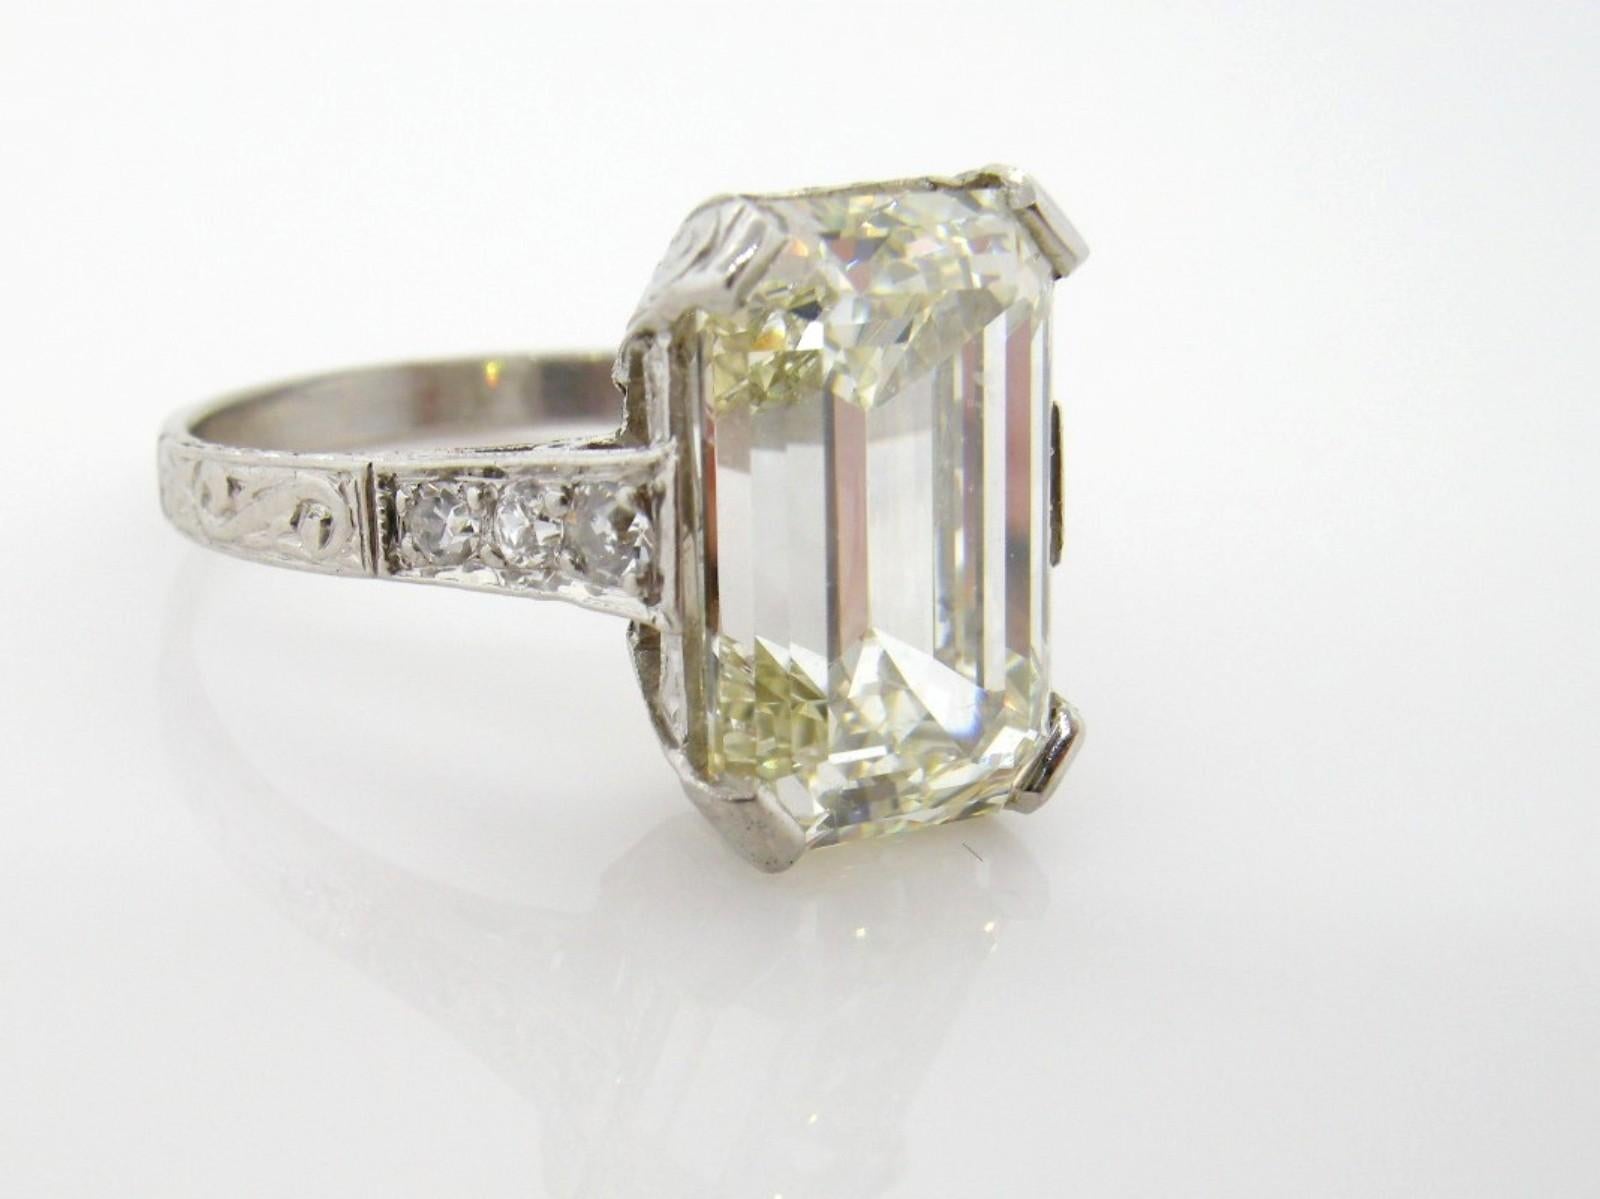 Dazzling! A beautiful recreation of an Art Deco style platinum ring, featuring a fabulous 5.38 carat Emerald cut Diamond.  The diamond is accompanied by G.I.A. Report #2205762505 stating the diamond is M color - VS2 clarity.  The 1920s style